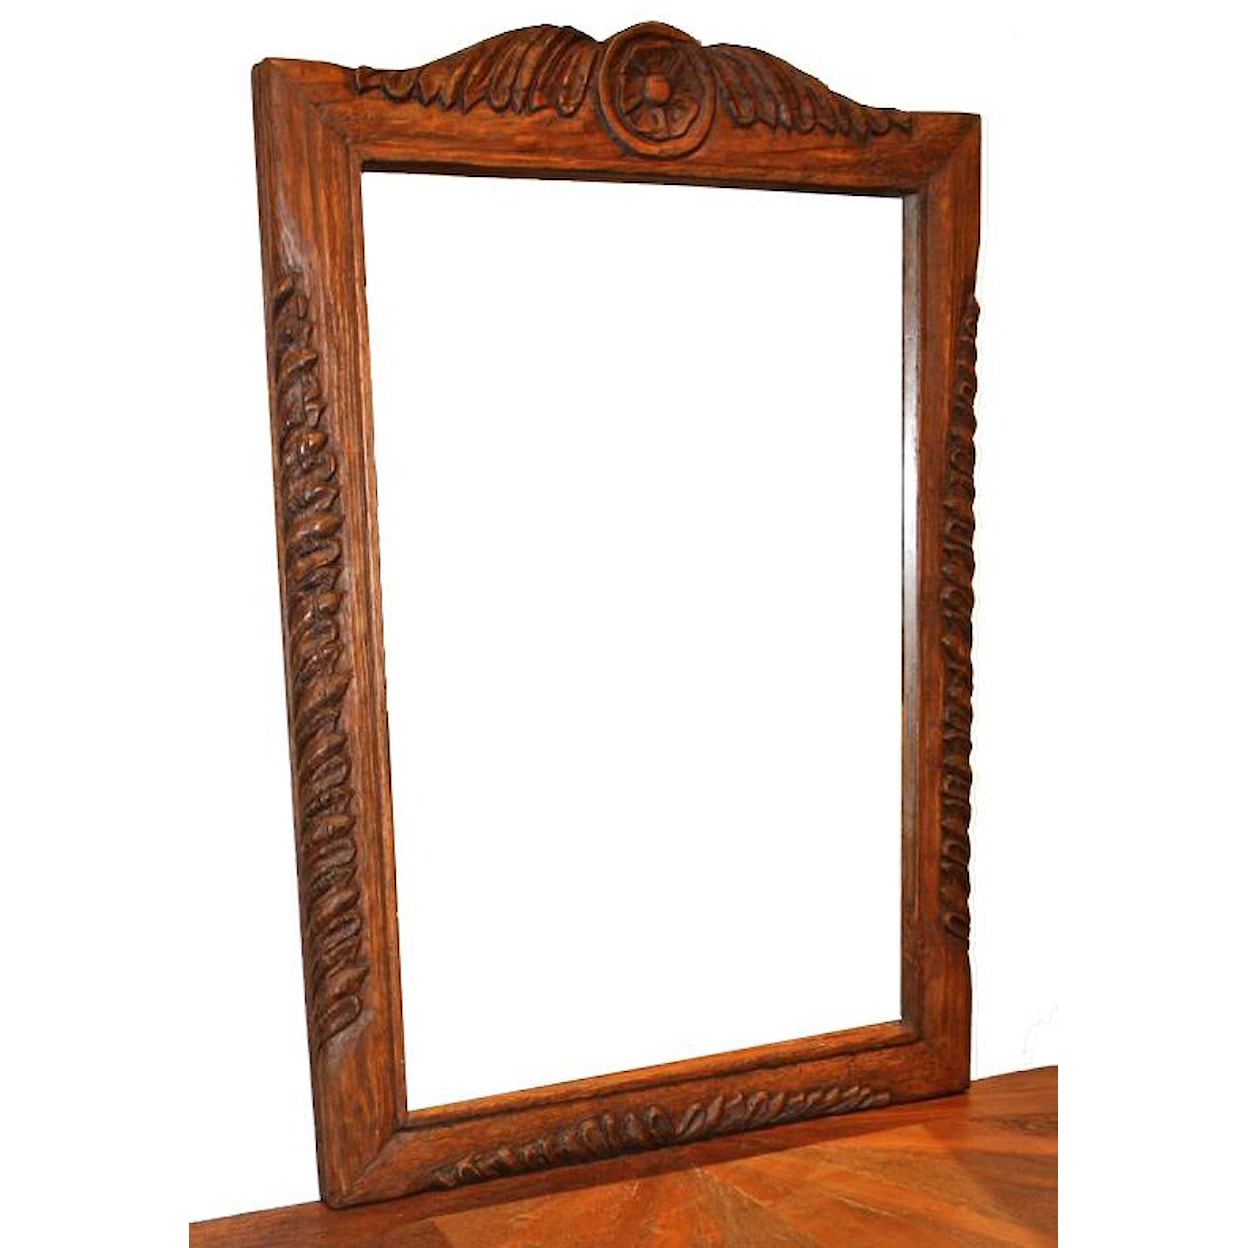 Furniture Source International Occasional Tables Mirror